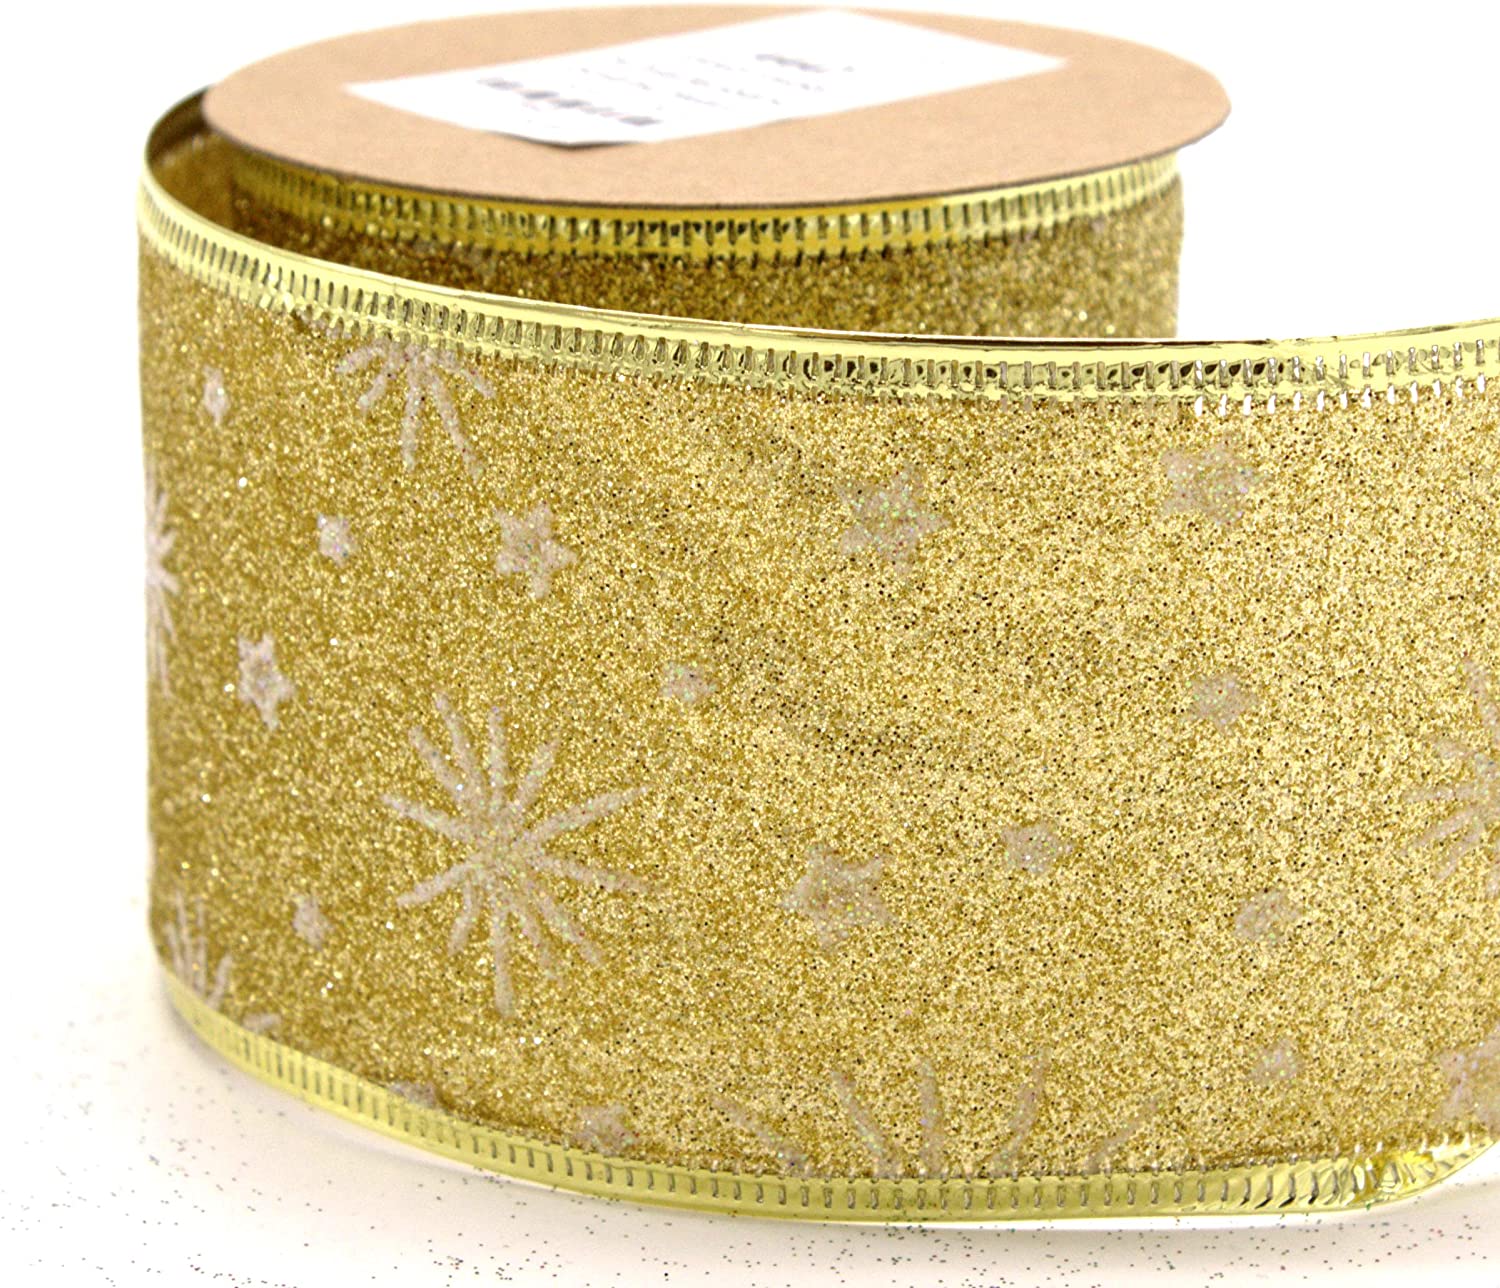 DARO Deco Fabric Ribbon 6.3 cm x 2.7 m in Gold or Black-Single or Set of 3